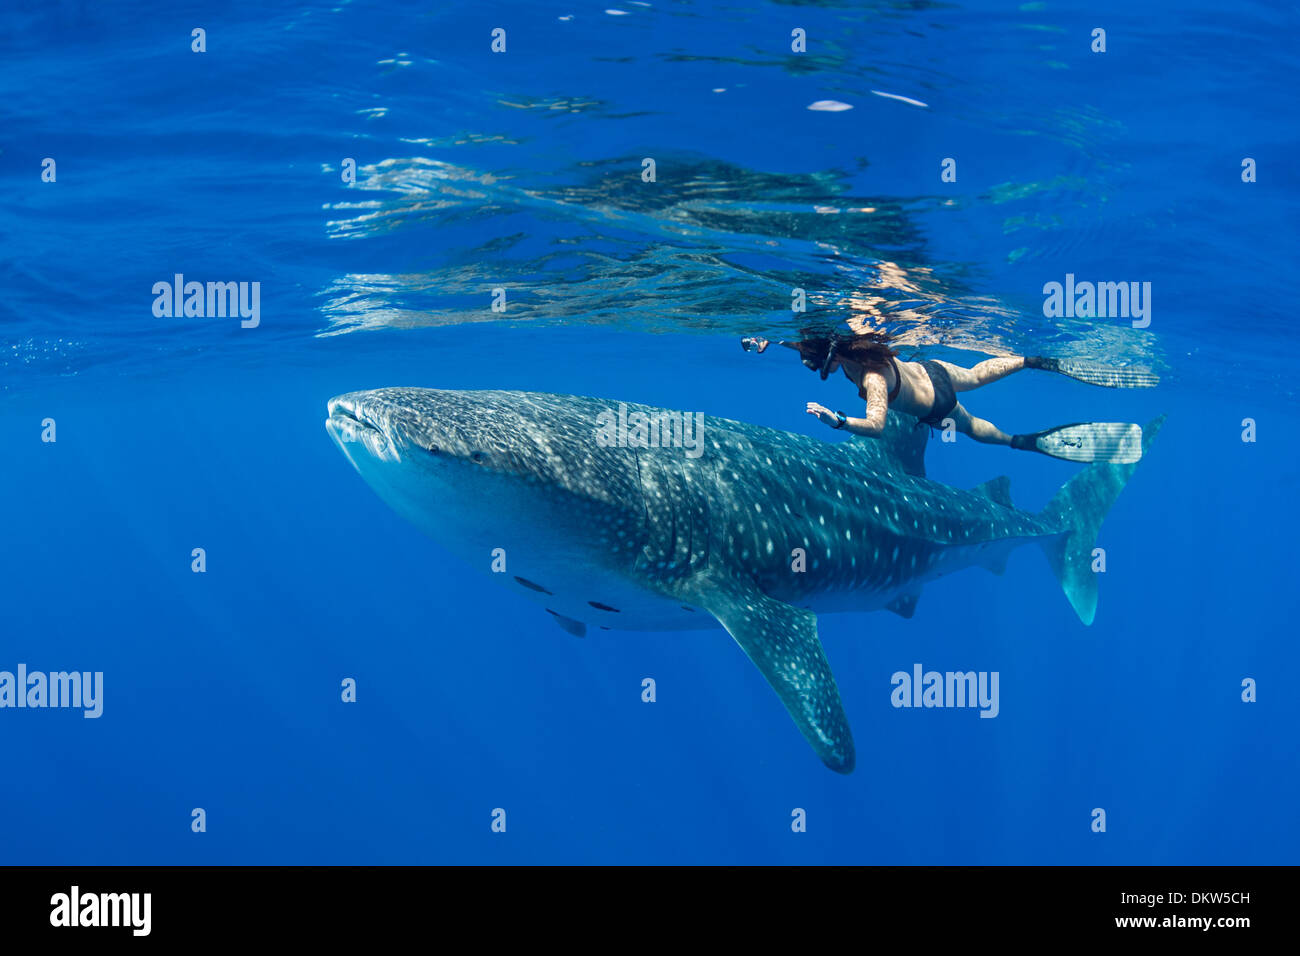 whale shark, Rhincodon typus, with remoras attached to underside, and snorkeler, Kona Coast, Hawaii Island, Pacific Ocean Stock Photo